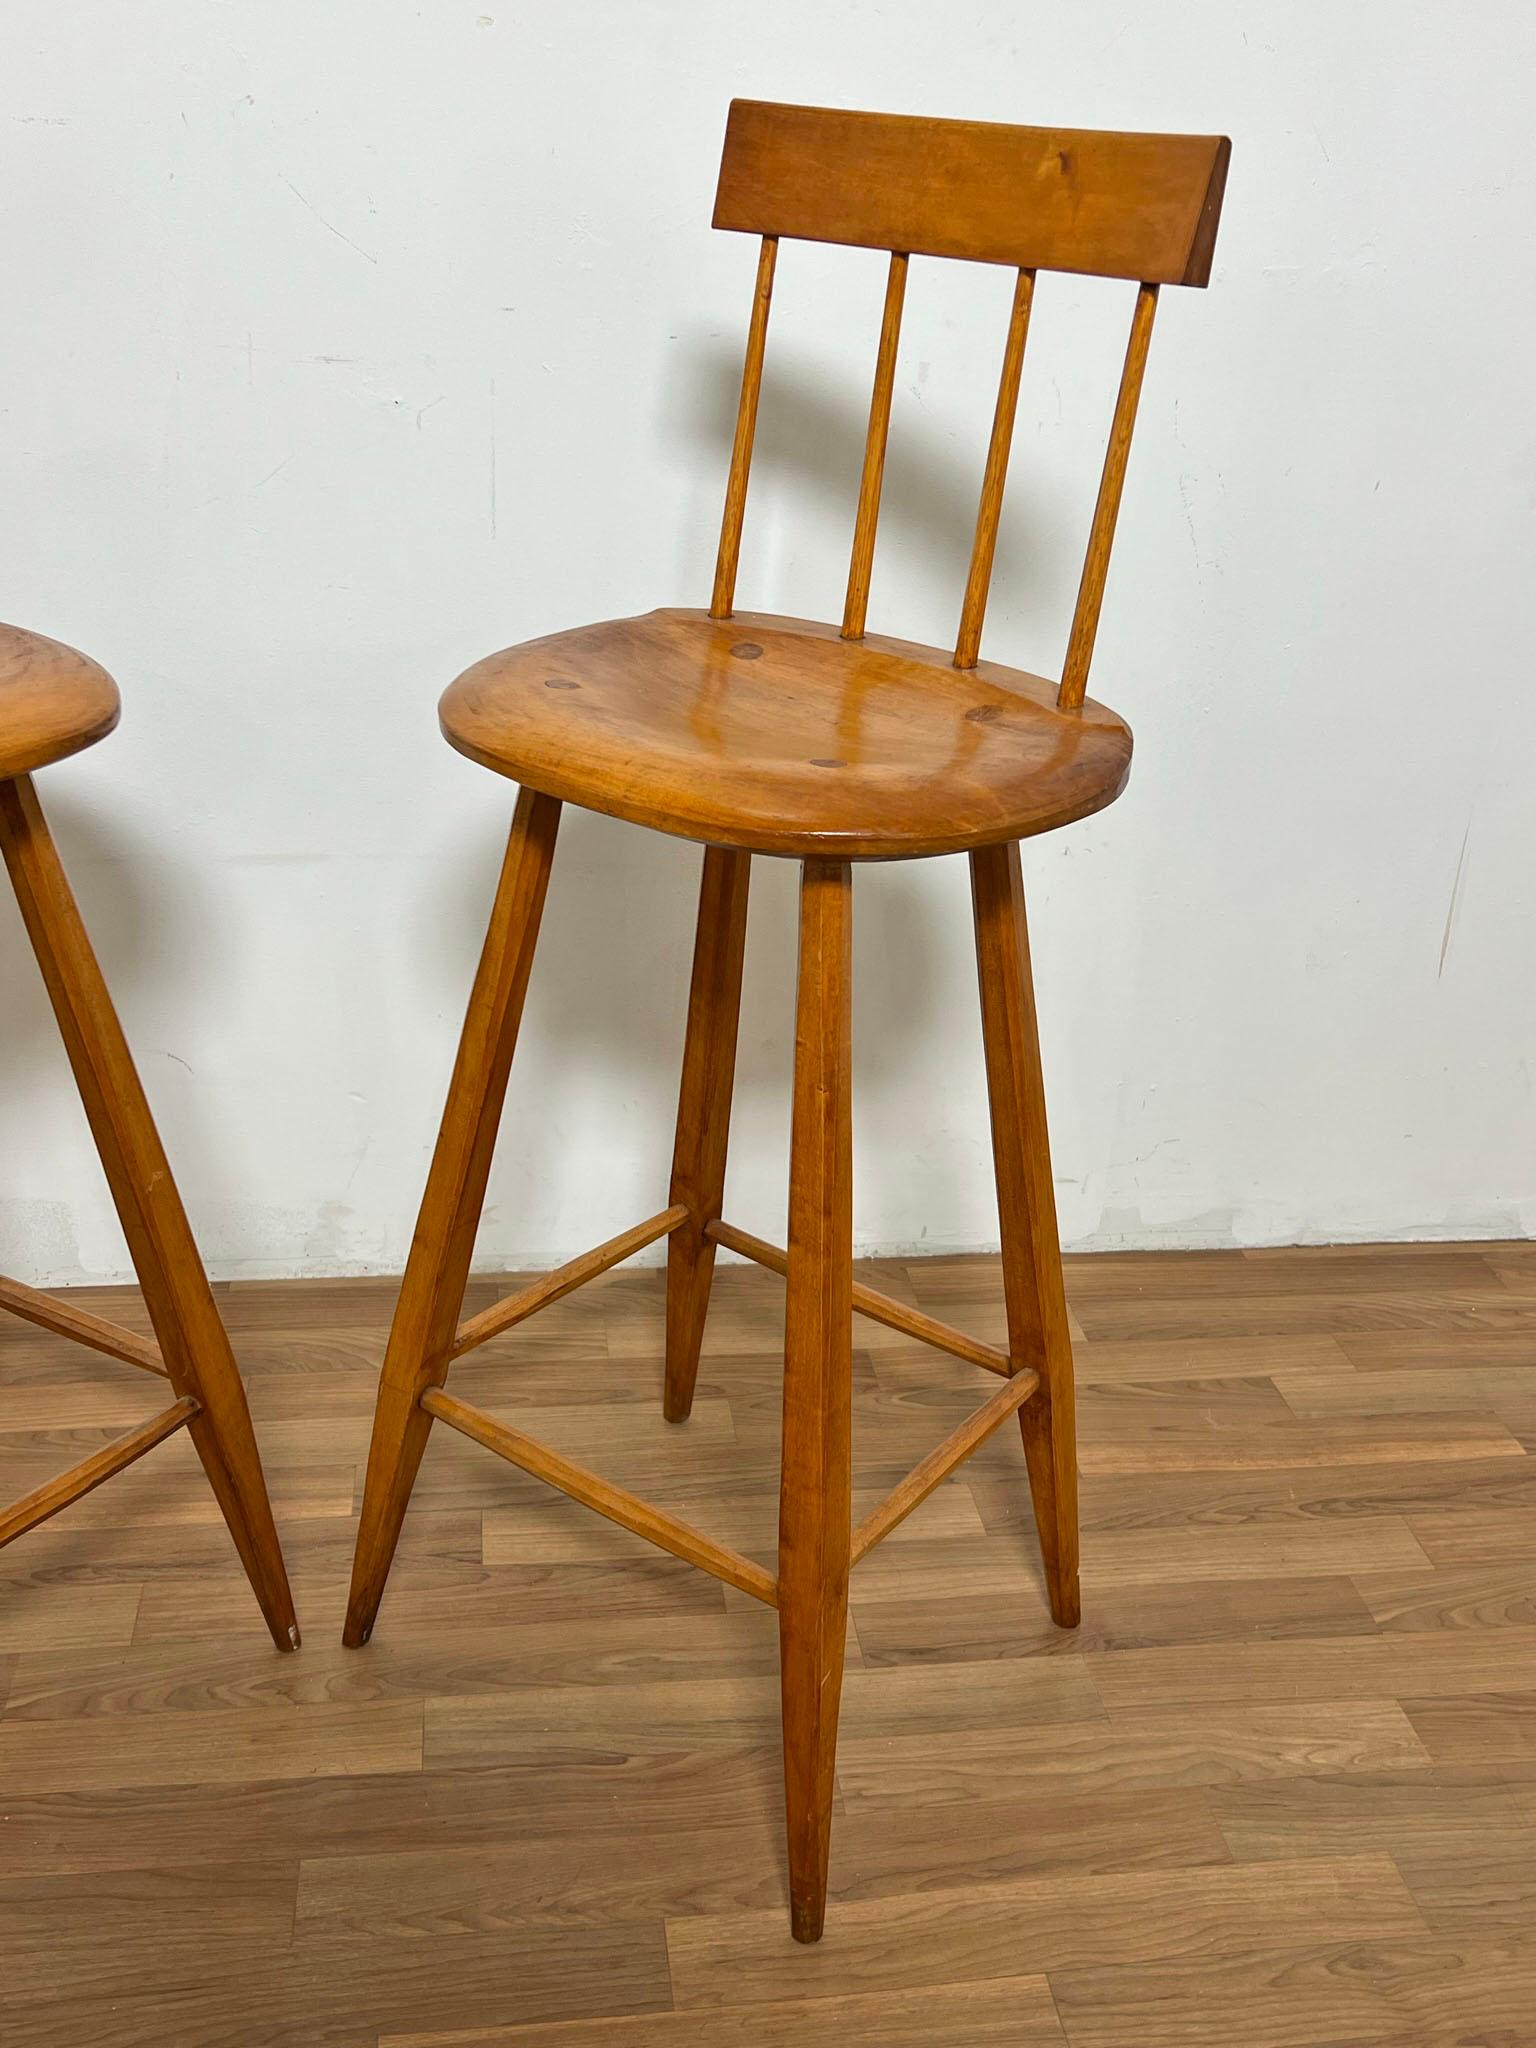 A pair of handmade studio craft bar stools in maple by the Boston area woodworker Bill Woodhead, dated 1985.